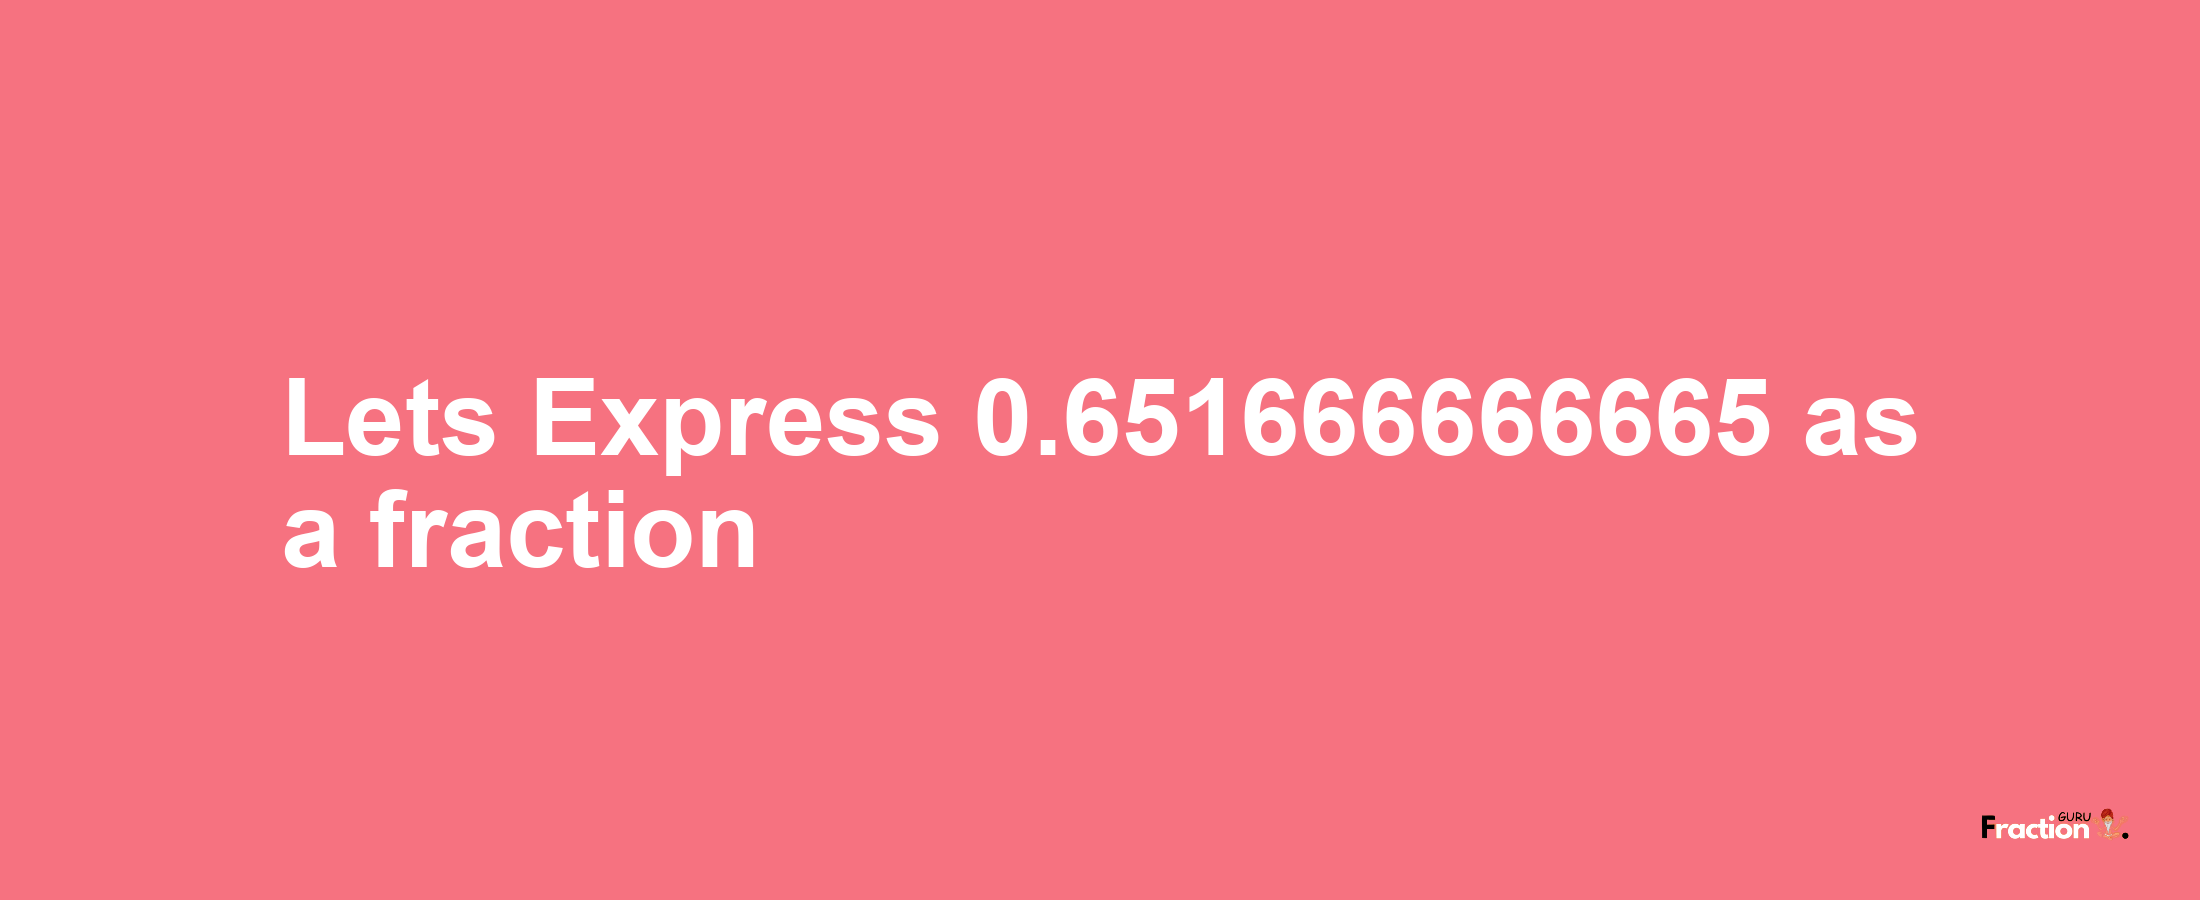 Lets Express 0.651666666665 as afraction